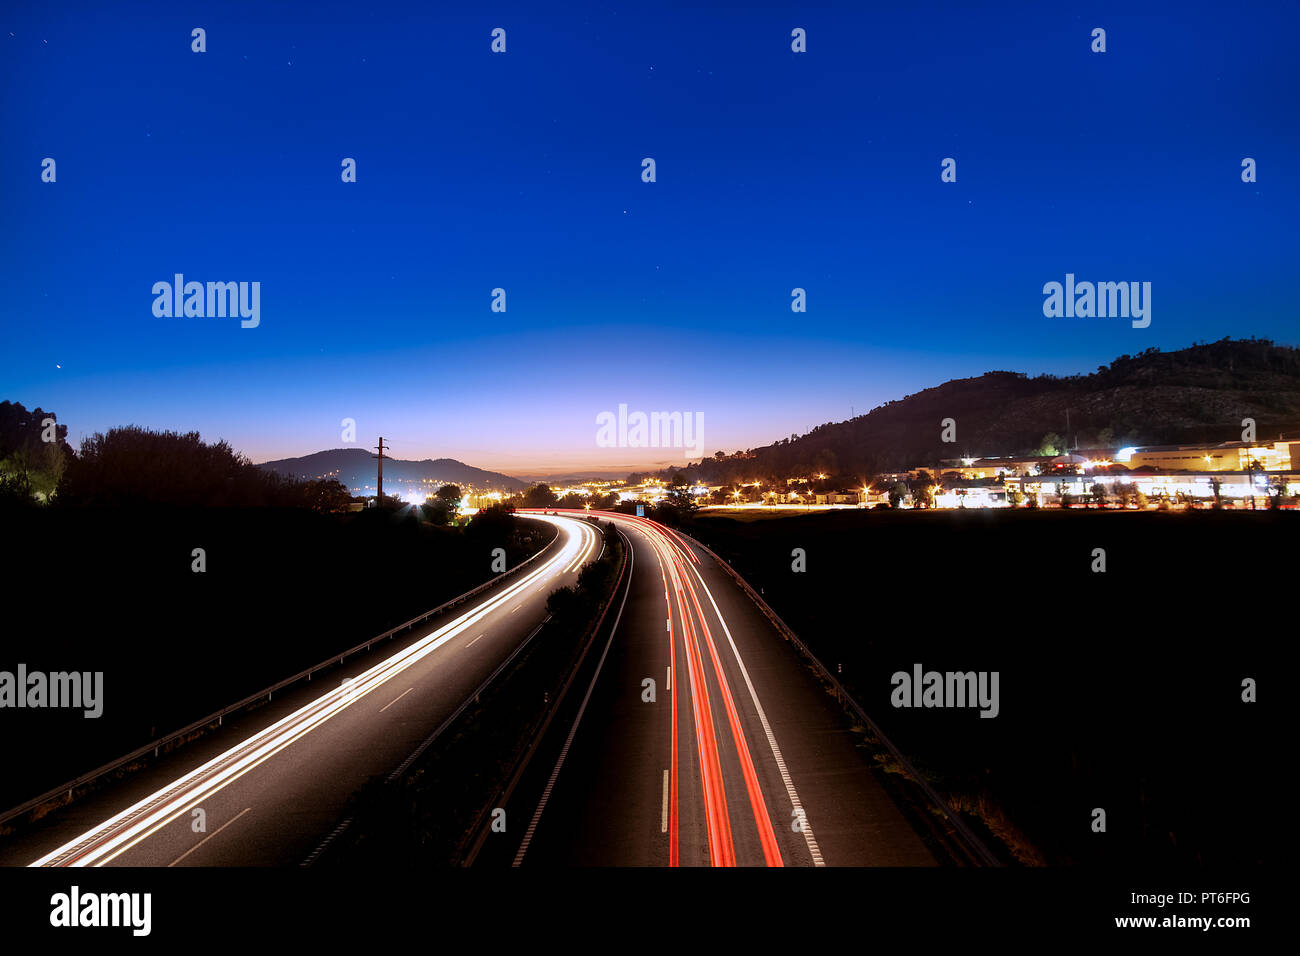 Long exposure night photography over the highway from Porto to city of Braga in Portugal. Fast car Light tracks and city lights at the dusk skyline. Stock Photo